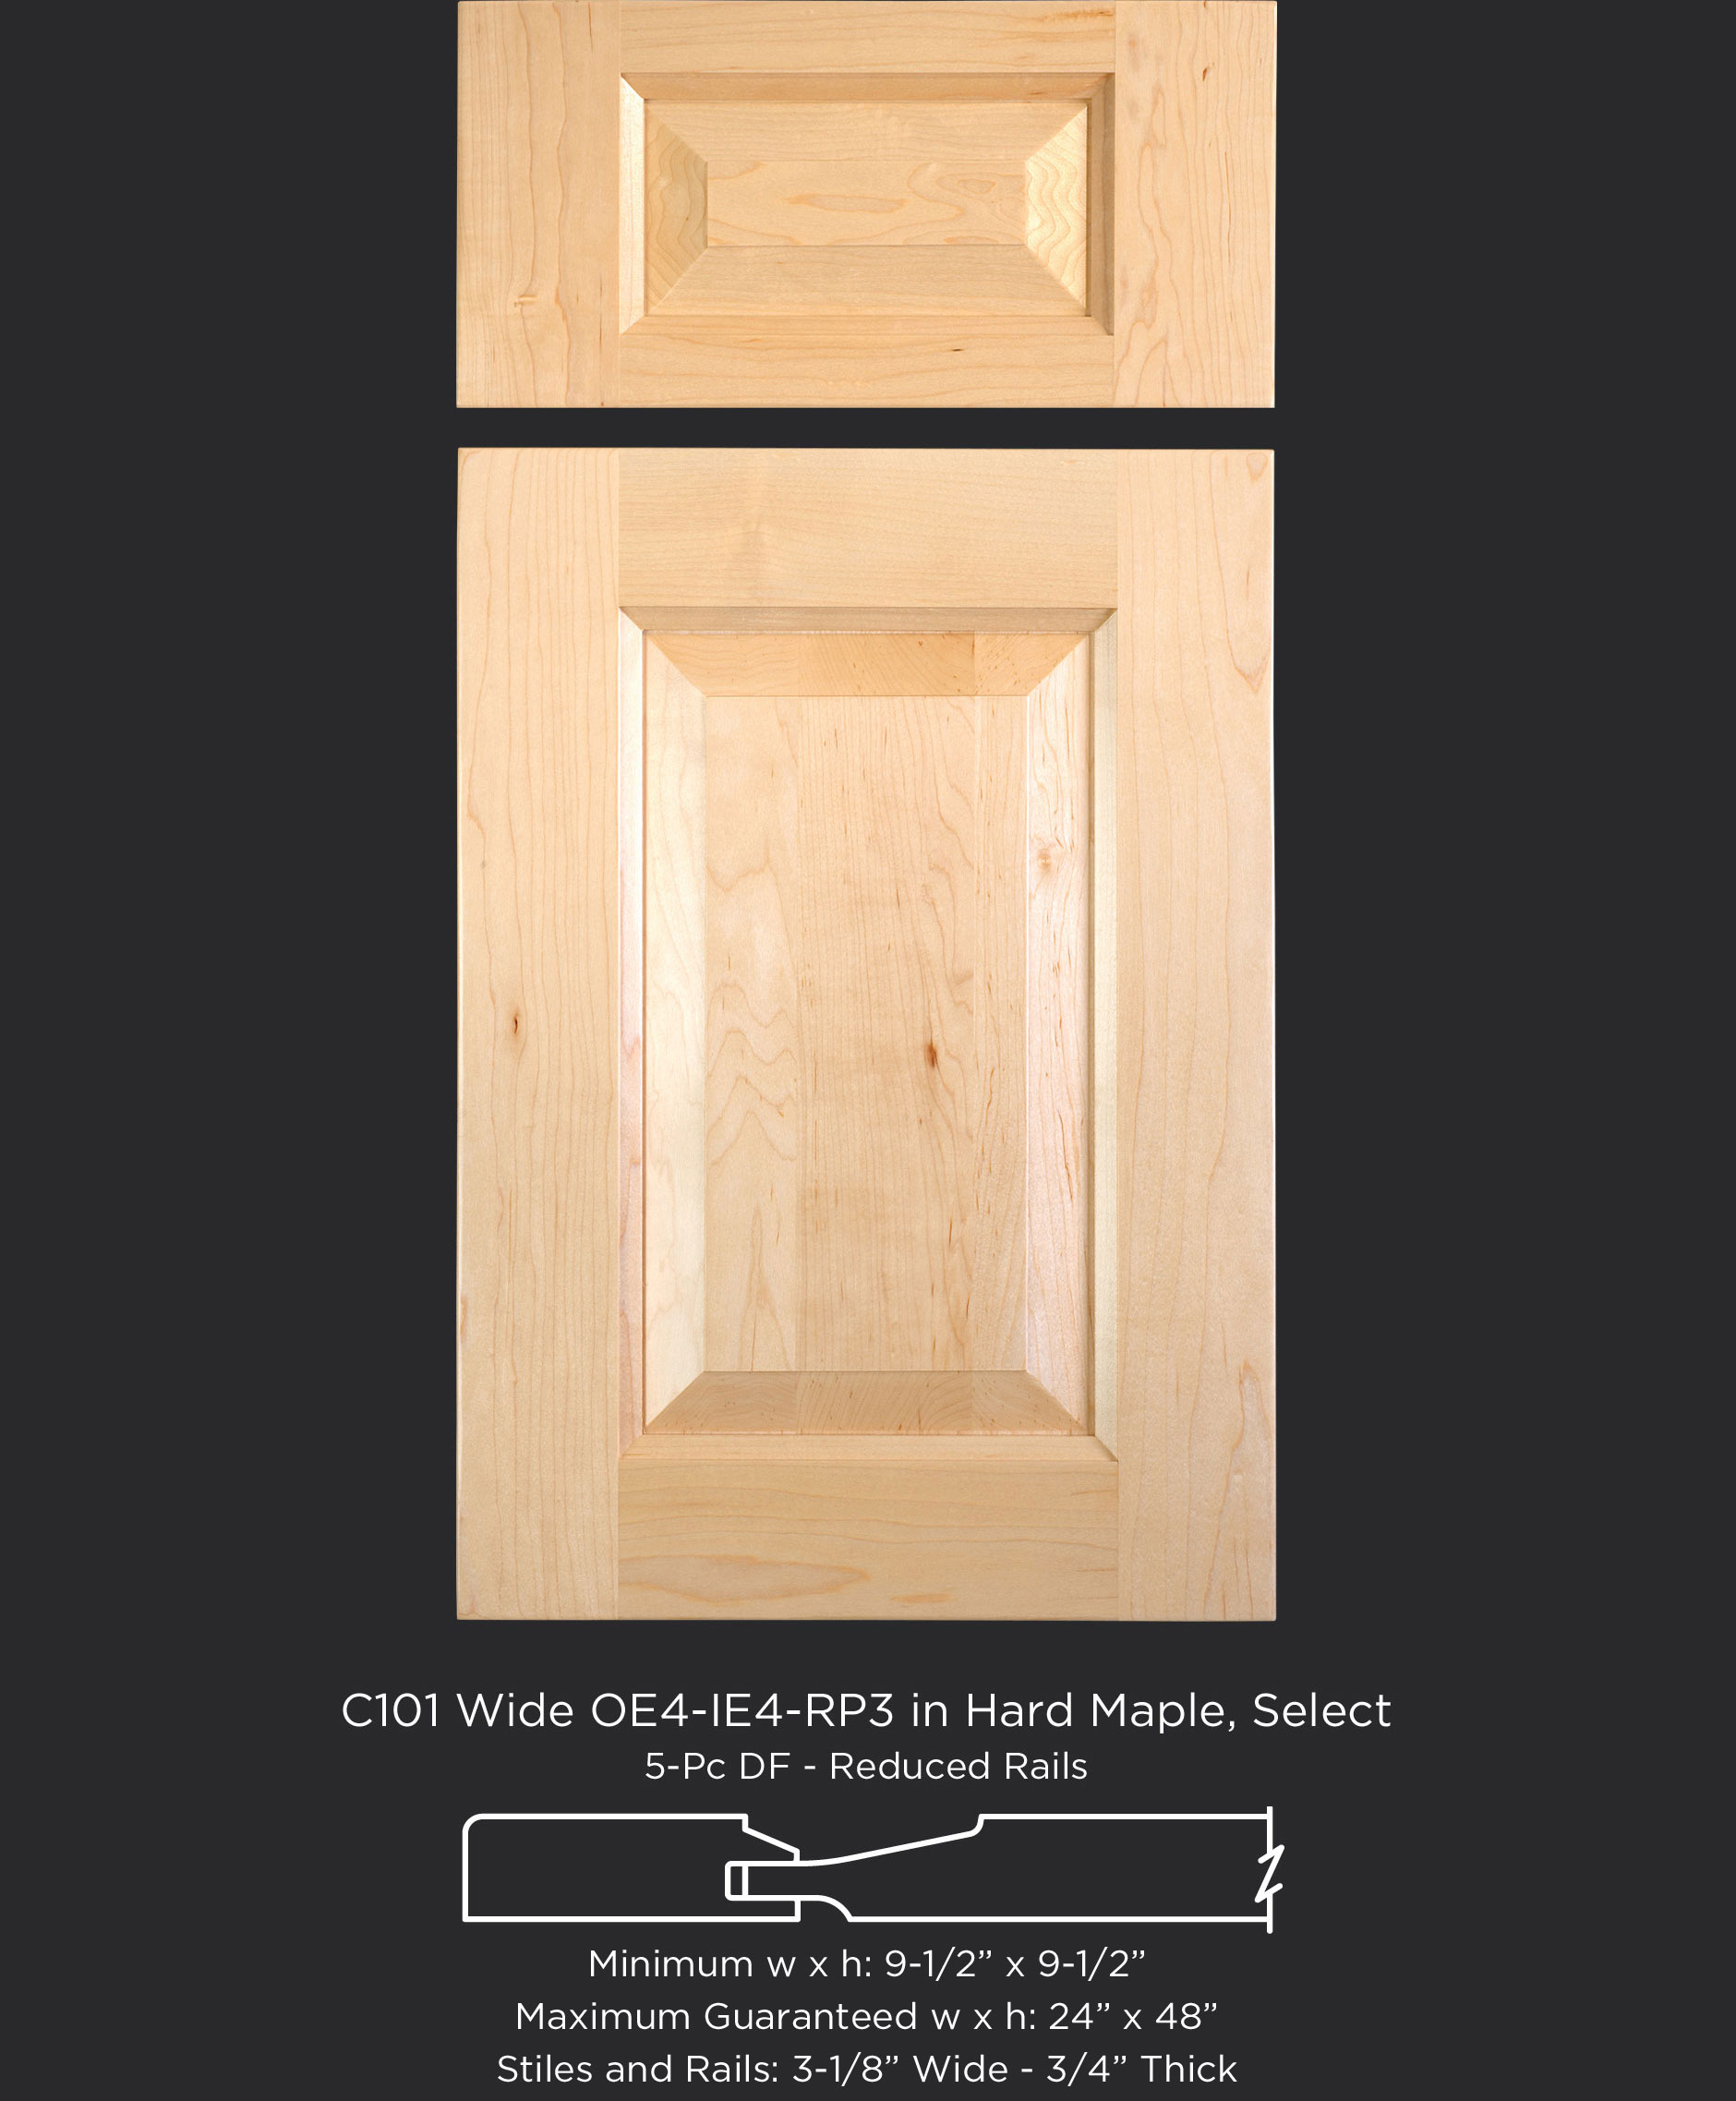 Cope and Stick Cabinet Door C101 Wide OE4-IE4-RP3 Hard Maple, Select and 5-piece drawer front with reduced rails